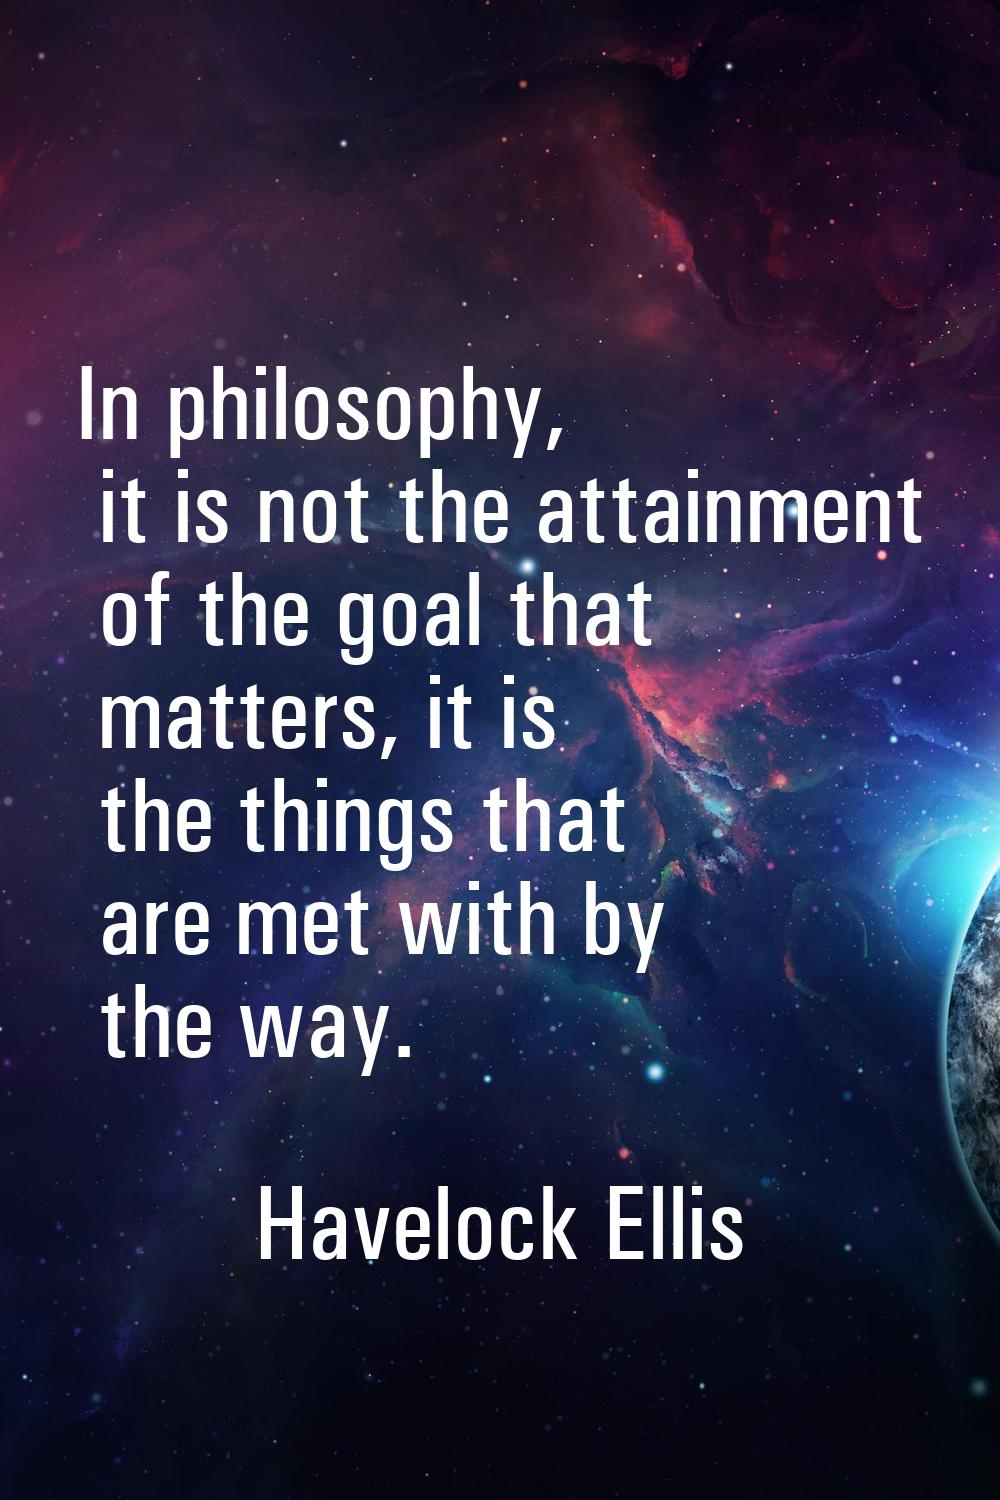 In philosophy, it is not the attainment of the goal that matters, it is the things that are met wit